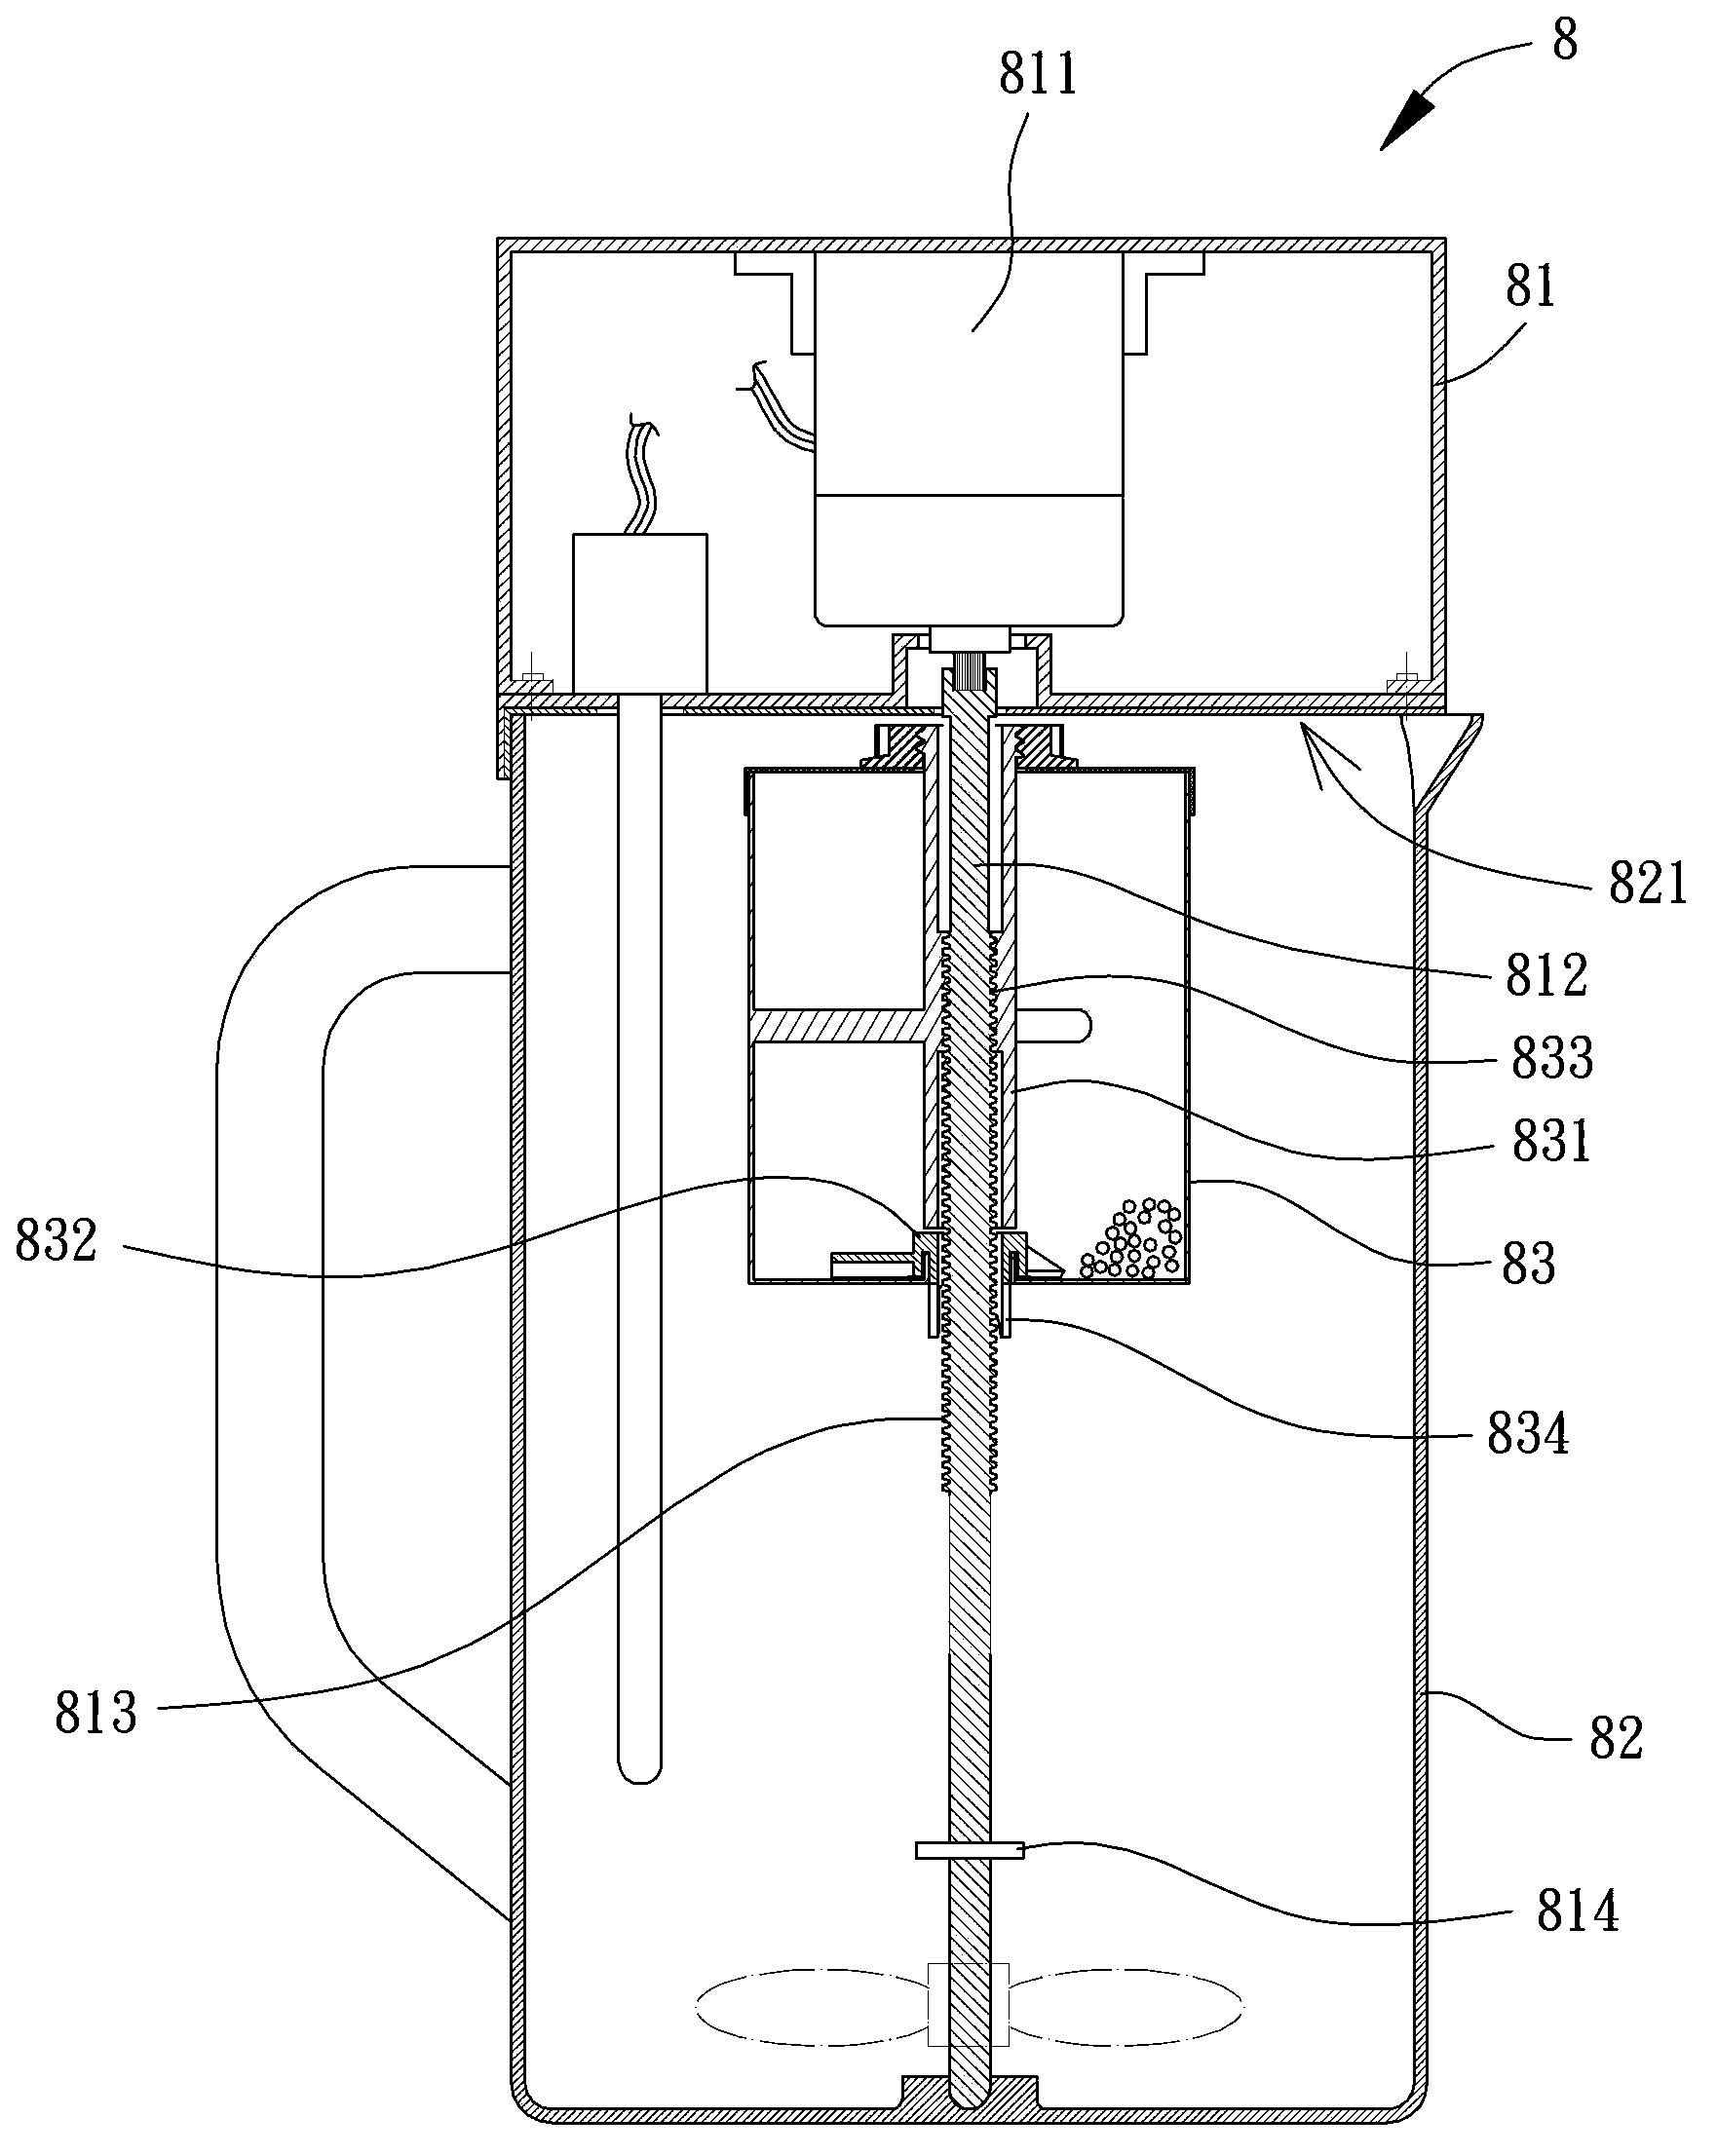 Residue and juice separating device